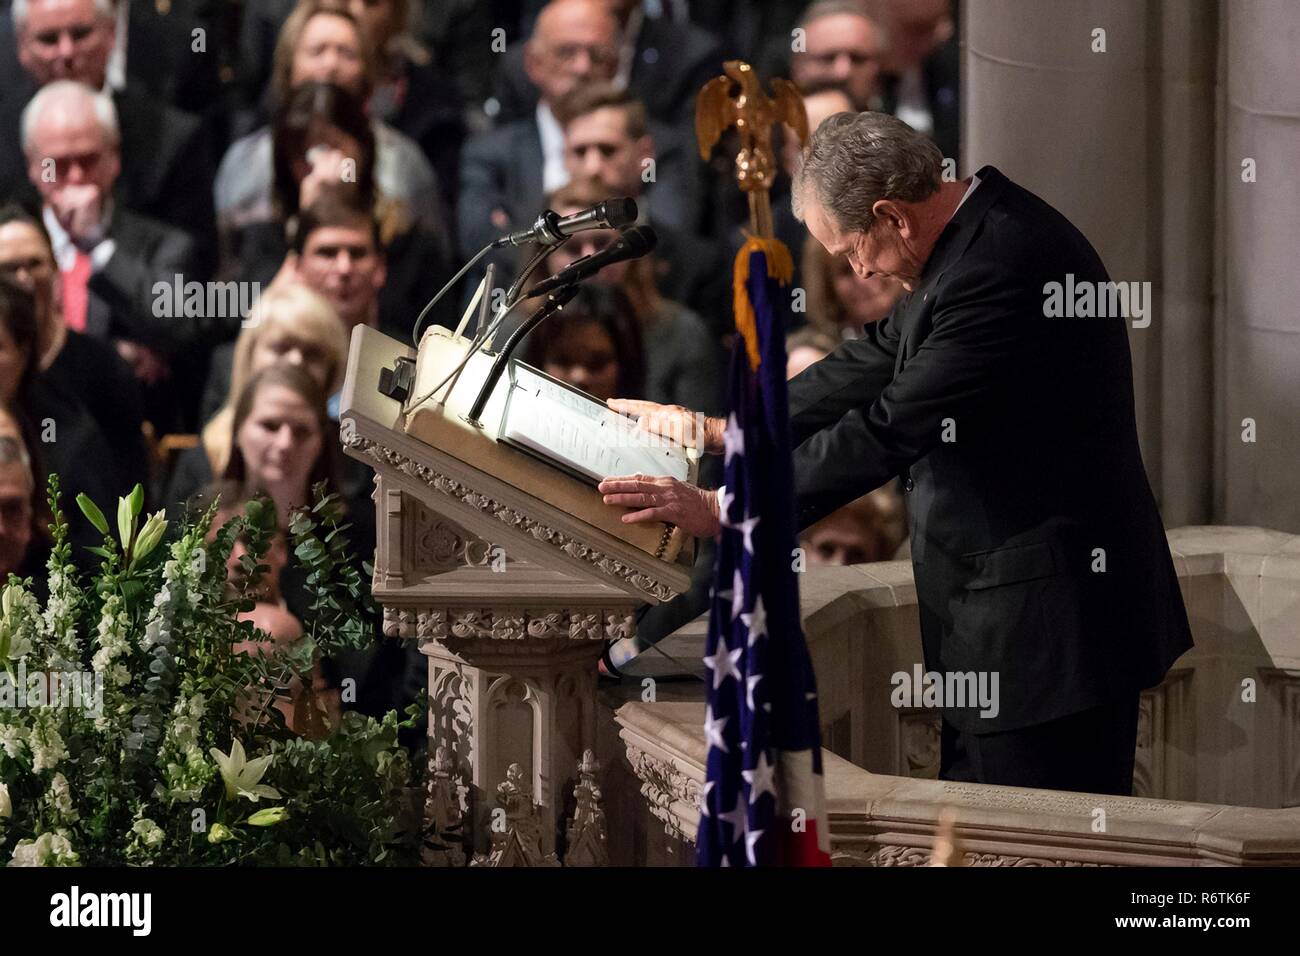 Former President George W. Bush pauses to gain his composure as he delivers the eulogy for his father, former President George H.W. Bush, at his State Funeral at the National Cathedral December 5, 2018 in Washington, DC. Bush, the 41st President, died in his Houston home at age 94. Stock Photo